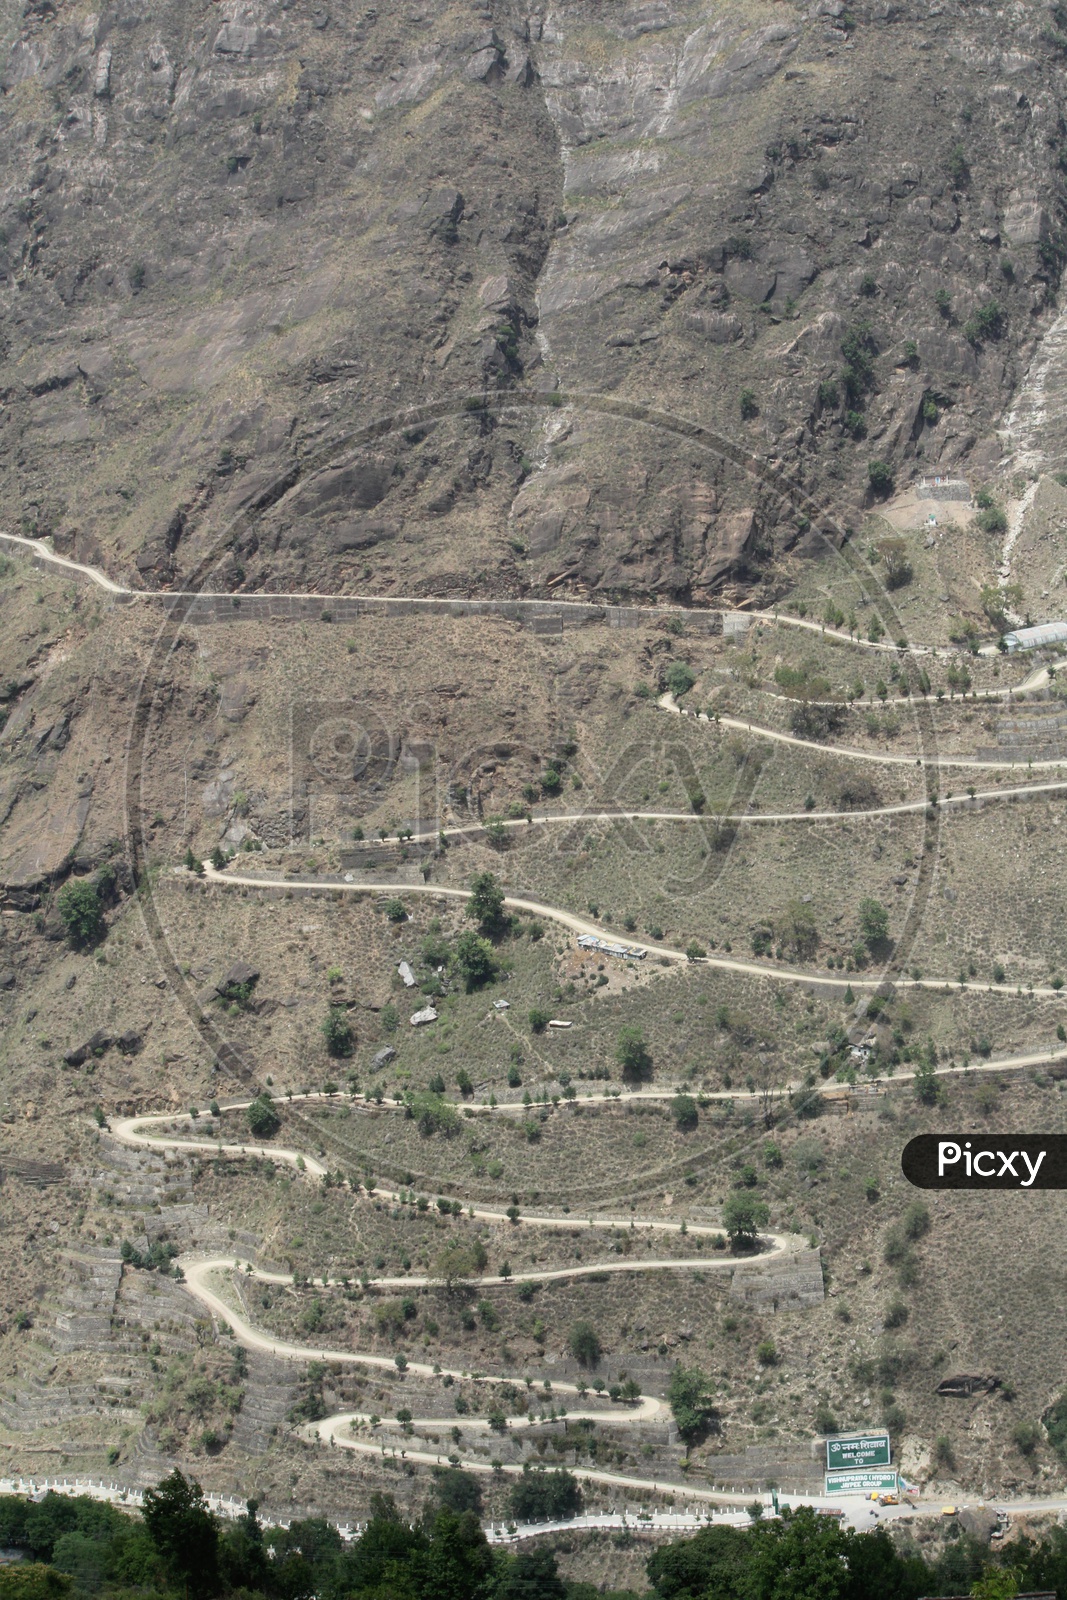 Ghat road on the way to Badrinath